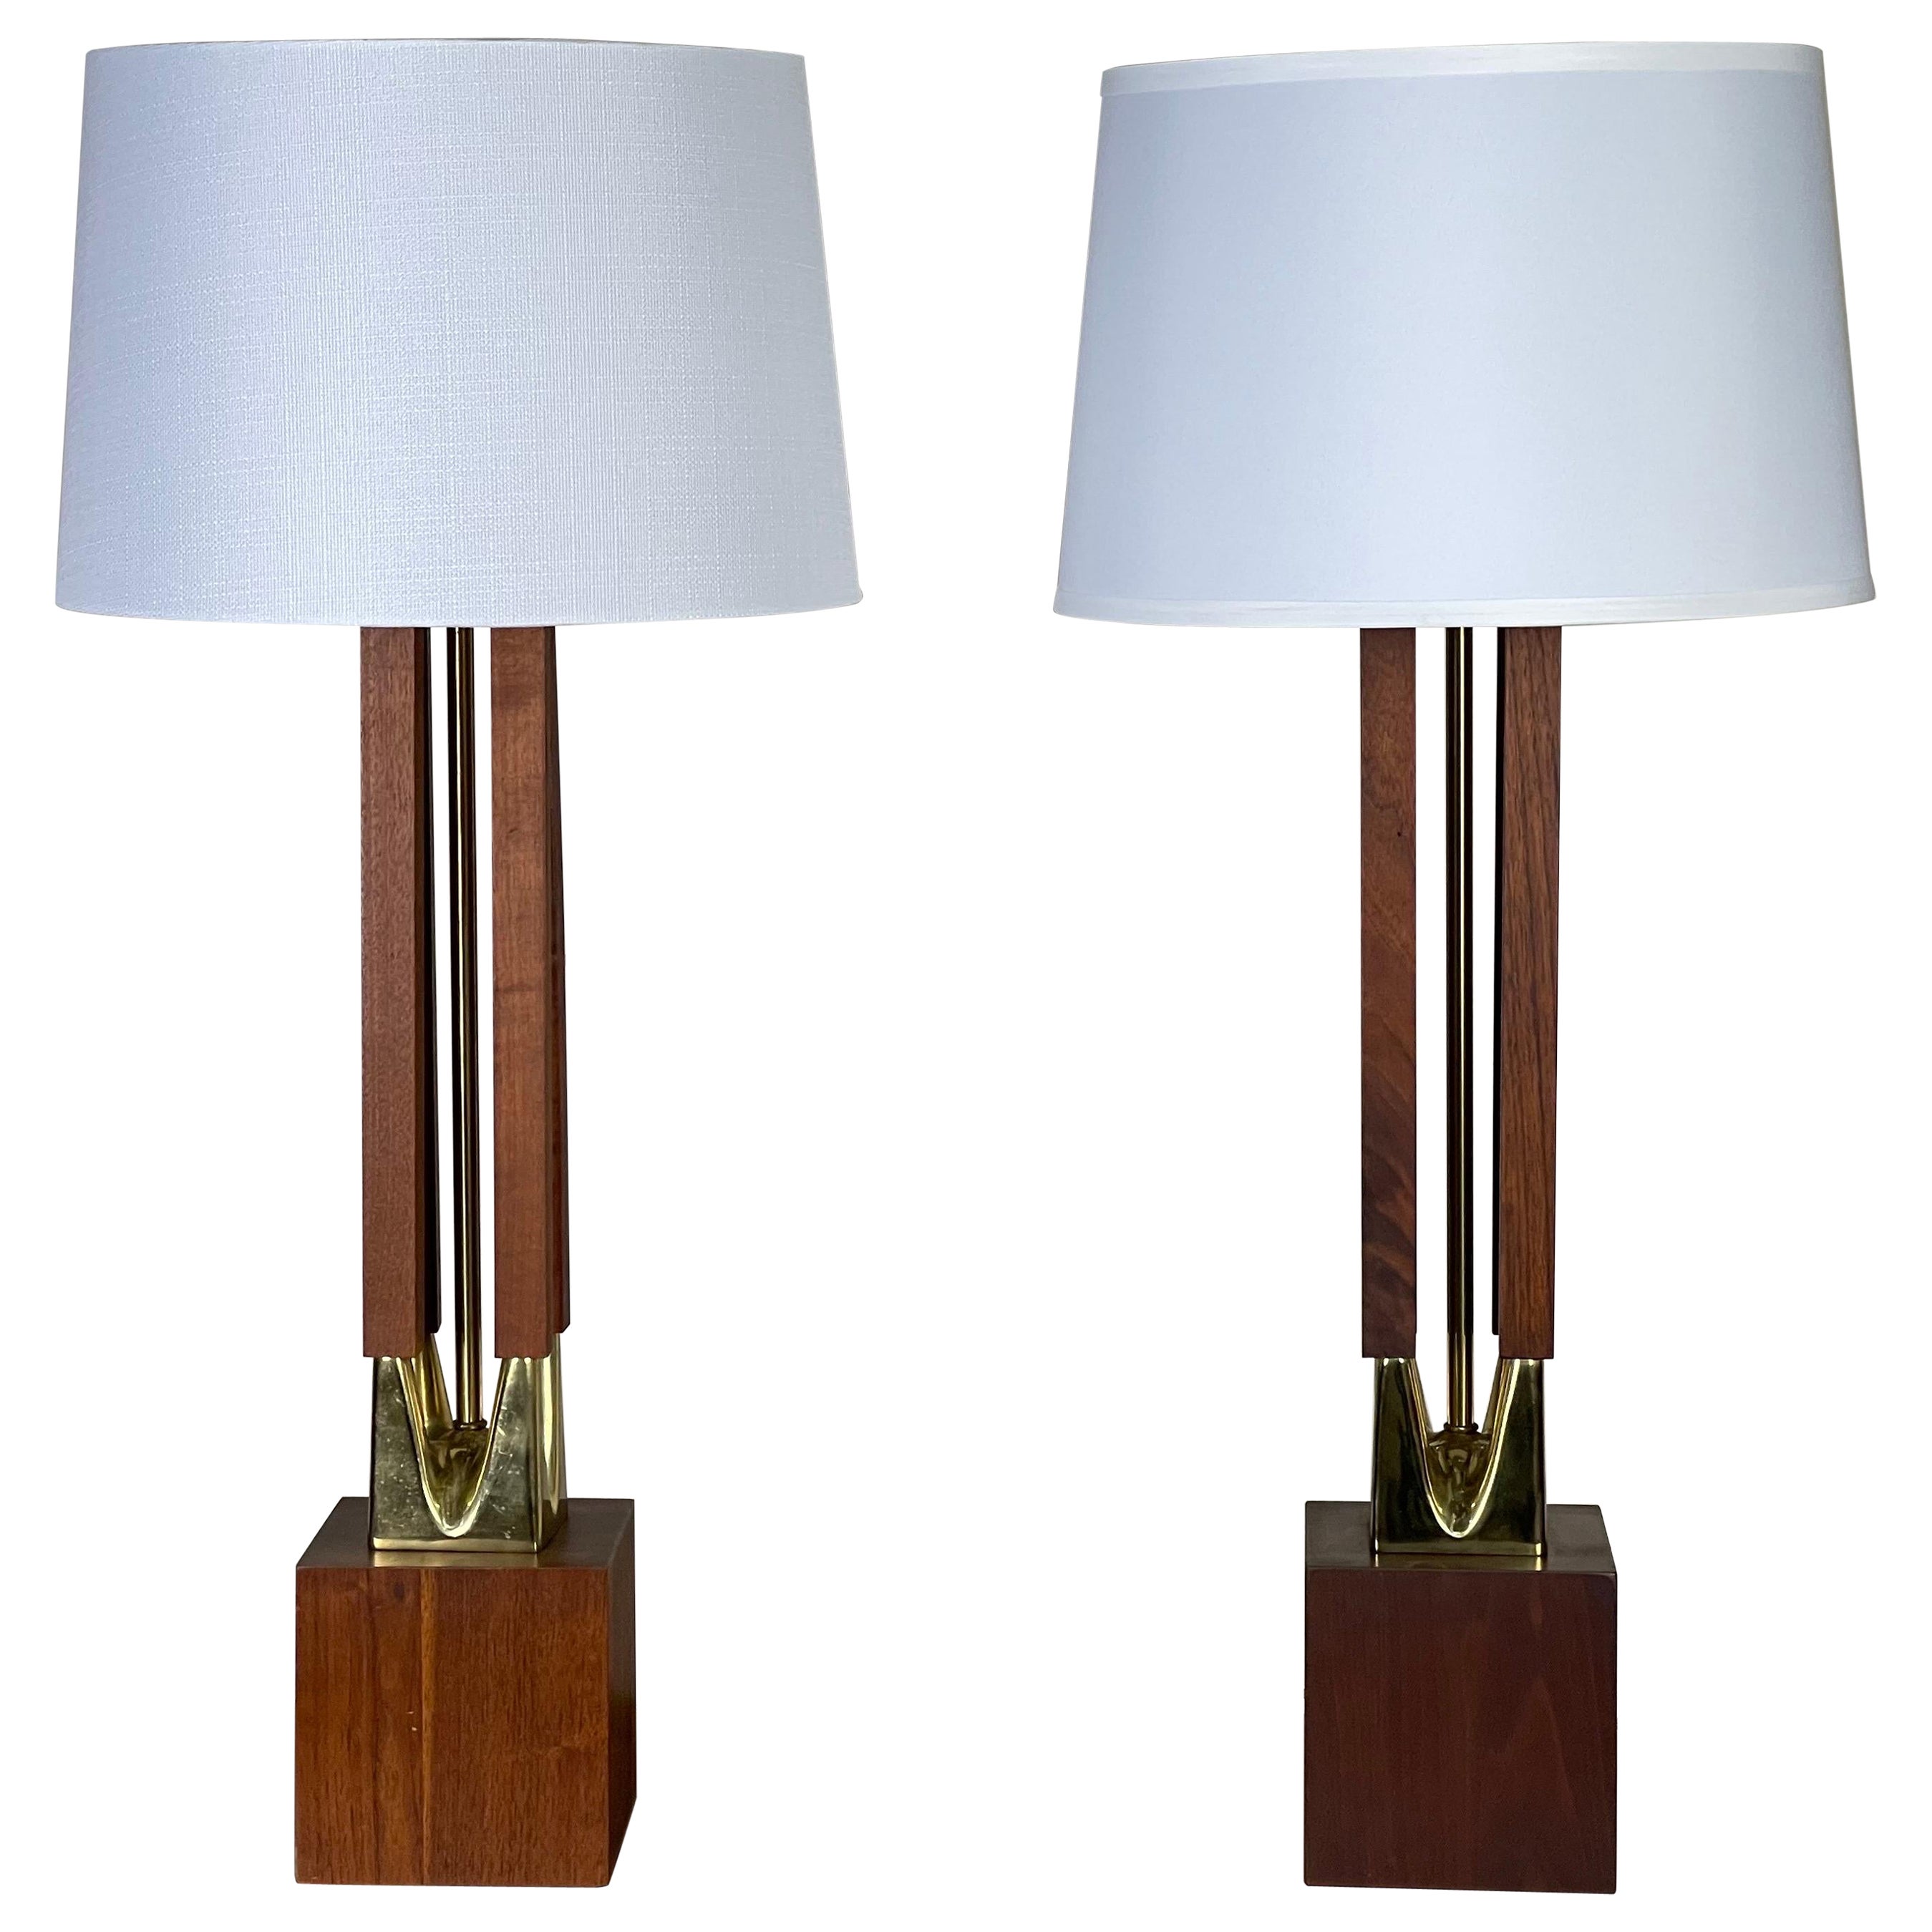 Pair of Midcentury Table Lamps by Laurel Lamp Co. 